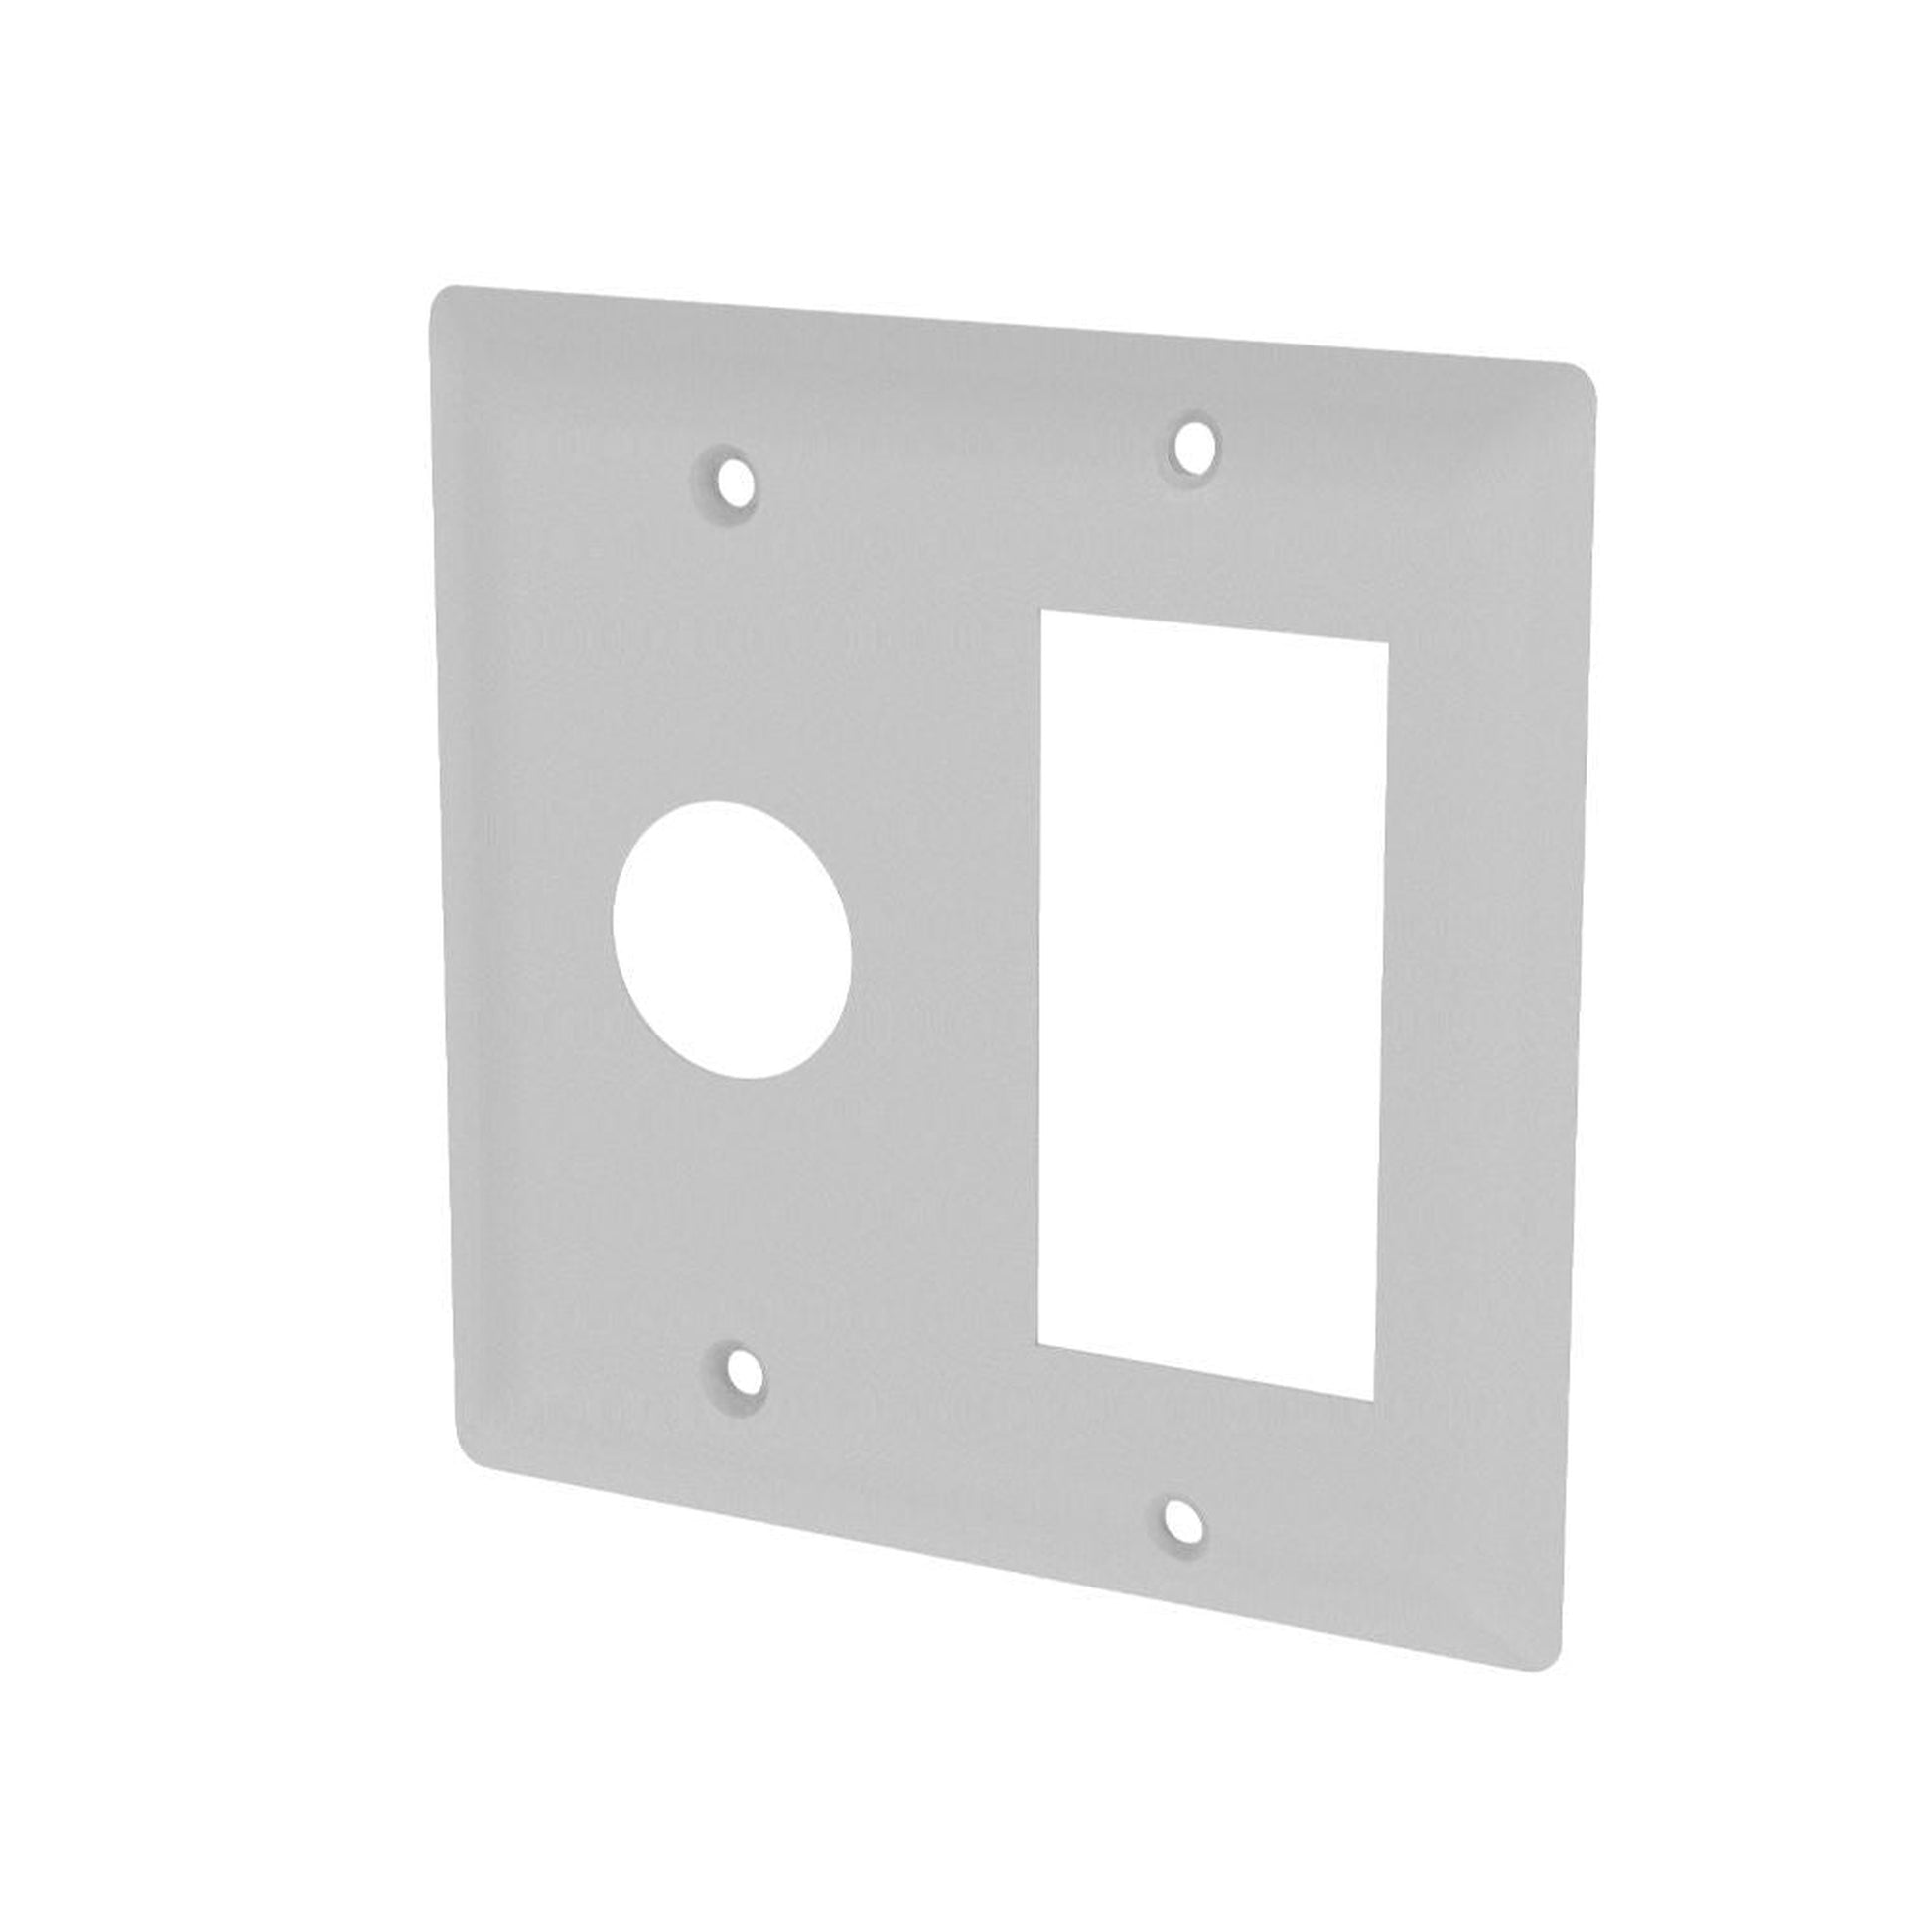 Amba Jeeves Double Gang Plate in White Finish